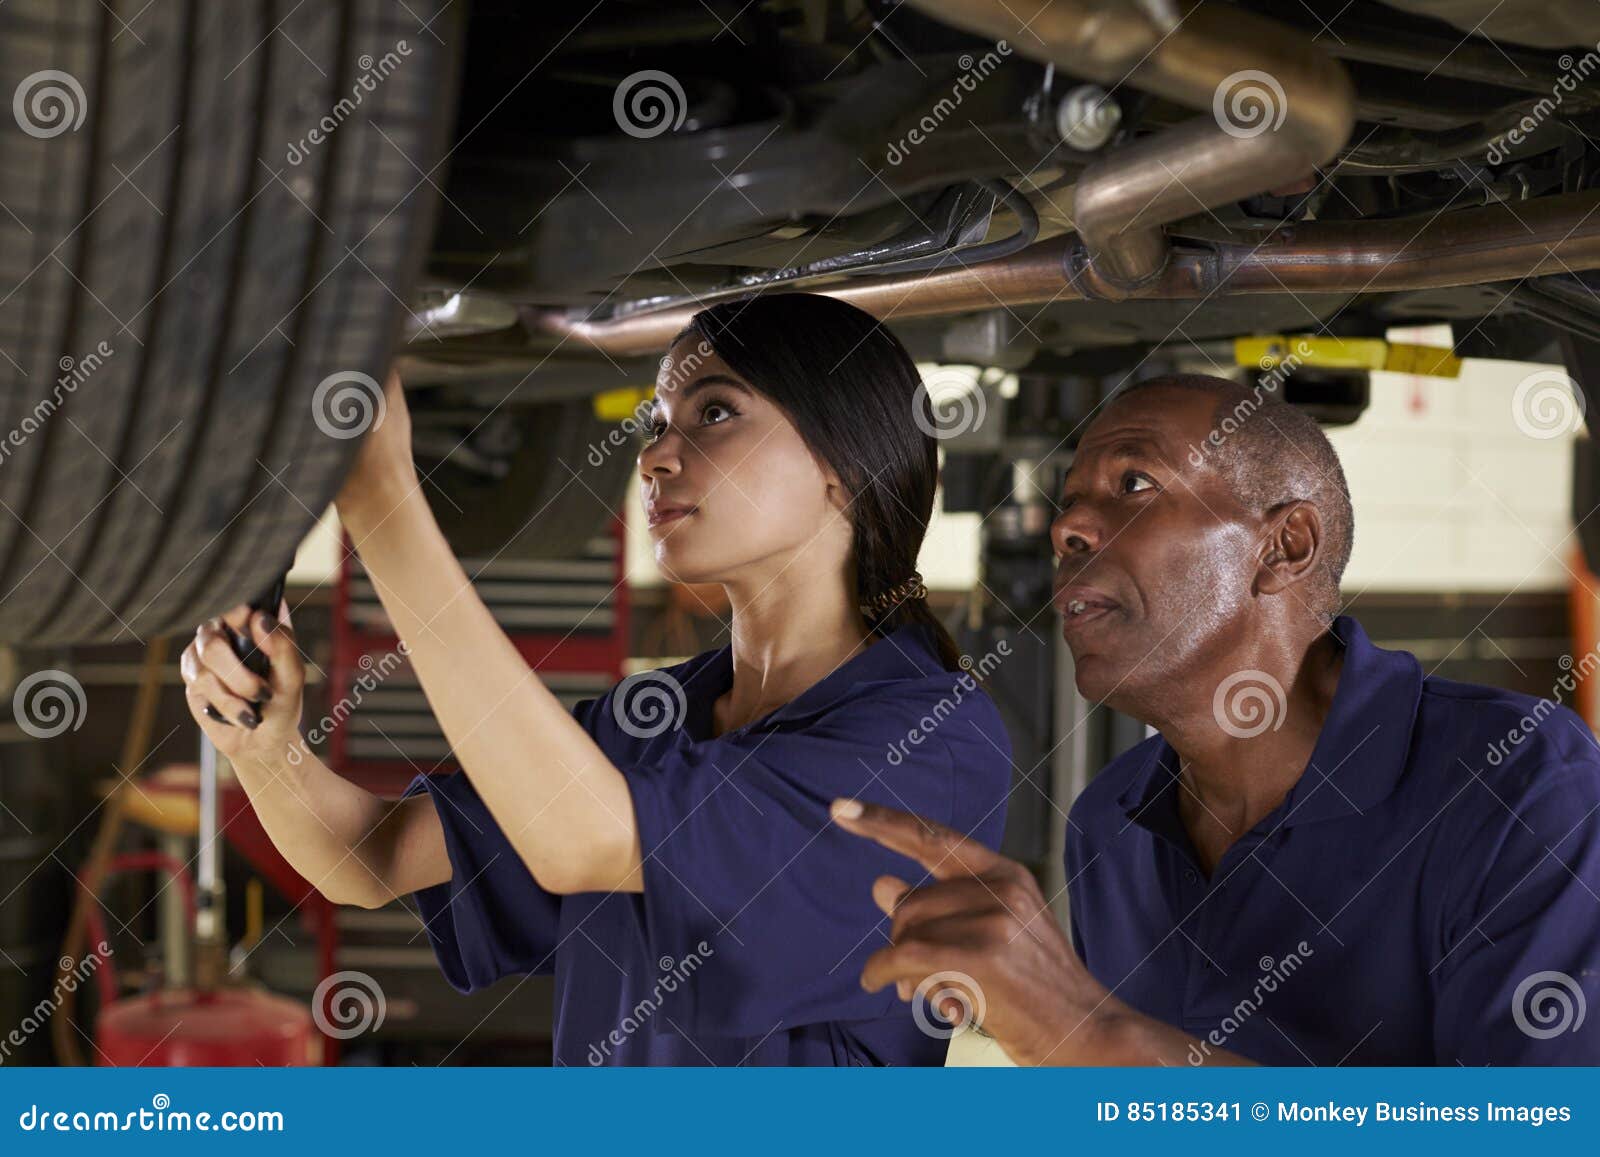 mechanic and female trainee working underneath car together